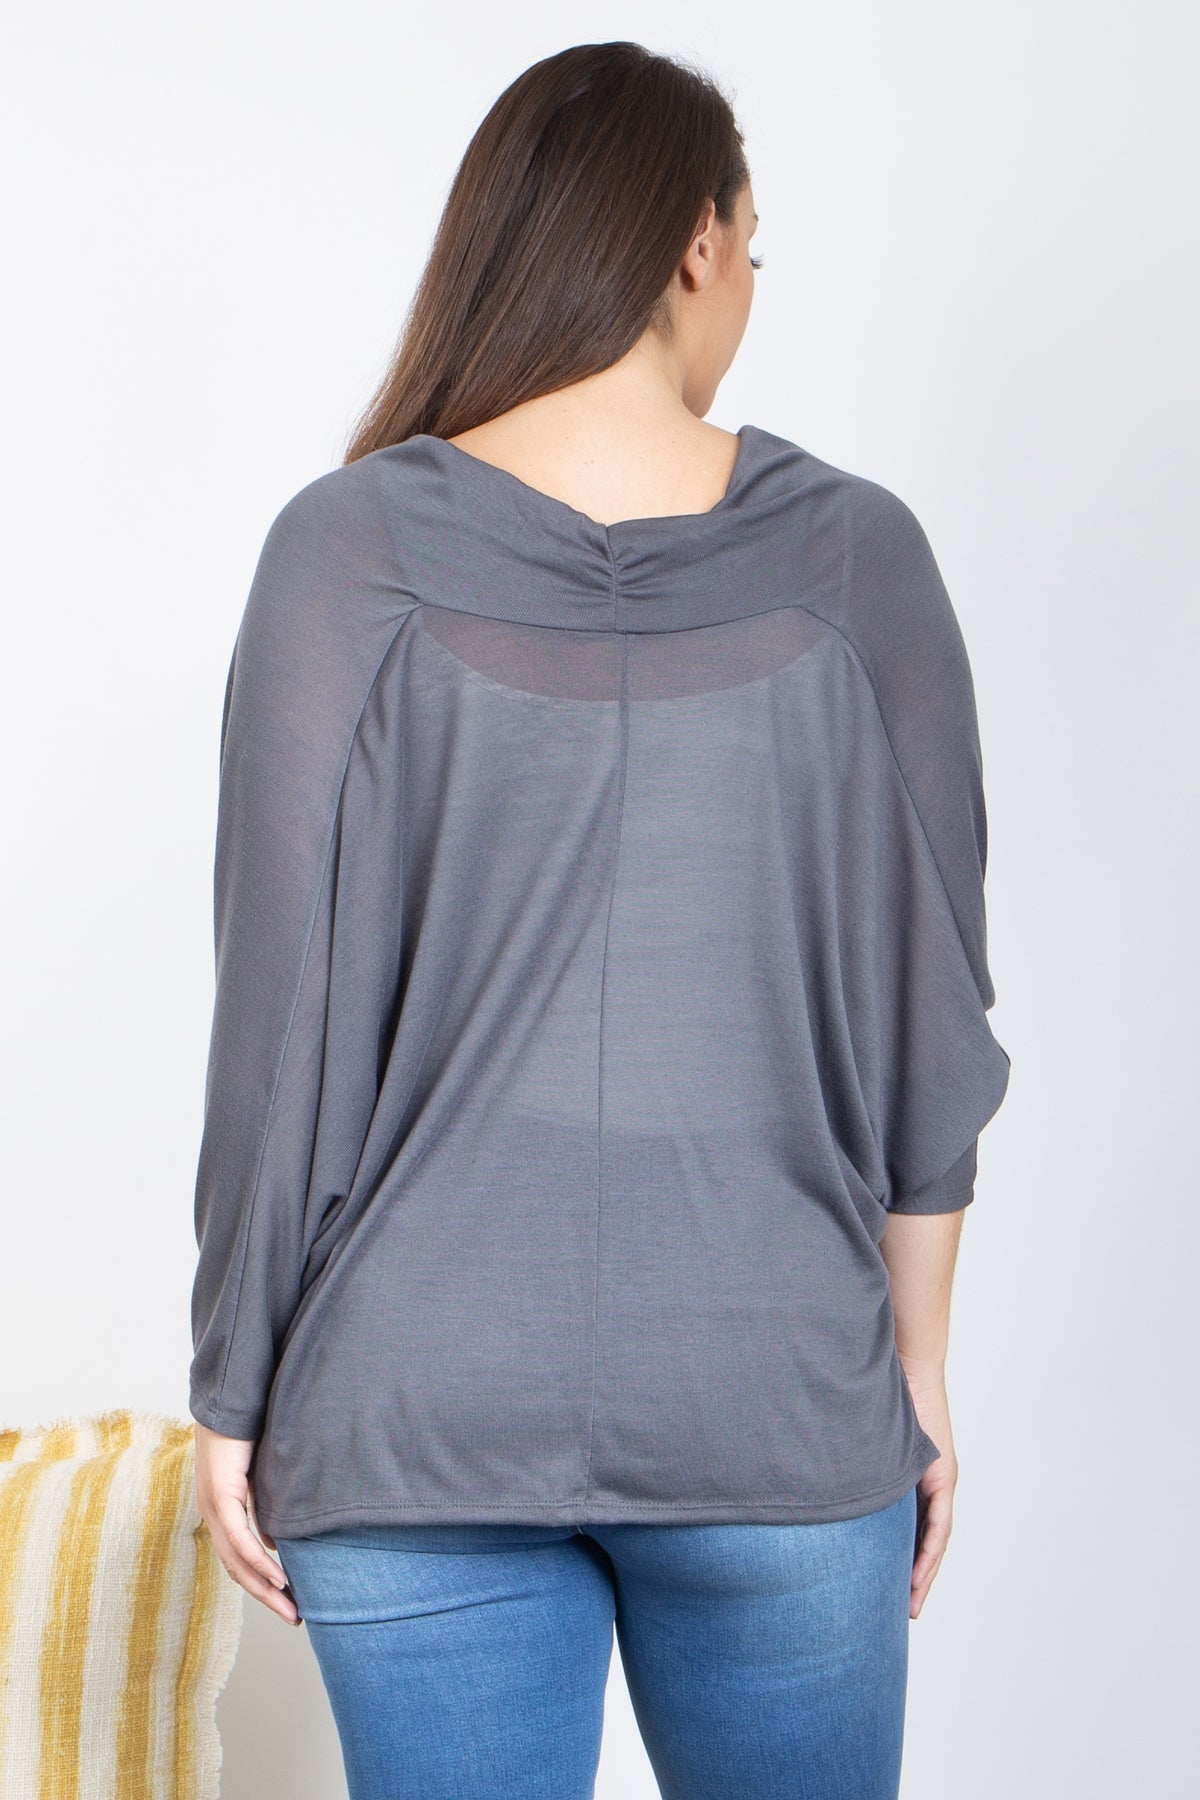 CHARCOAL#1 PLUS SIZE COWL NECKLINE DOLMAN SLEEVE TOP 2-2-2 (NOW $ 3.00 ONLY!)